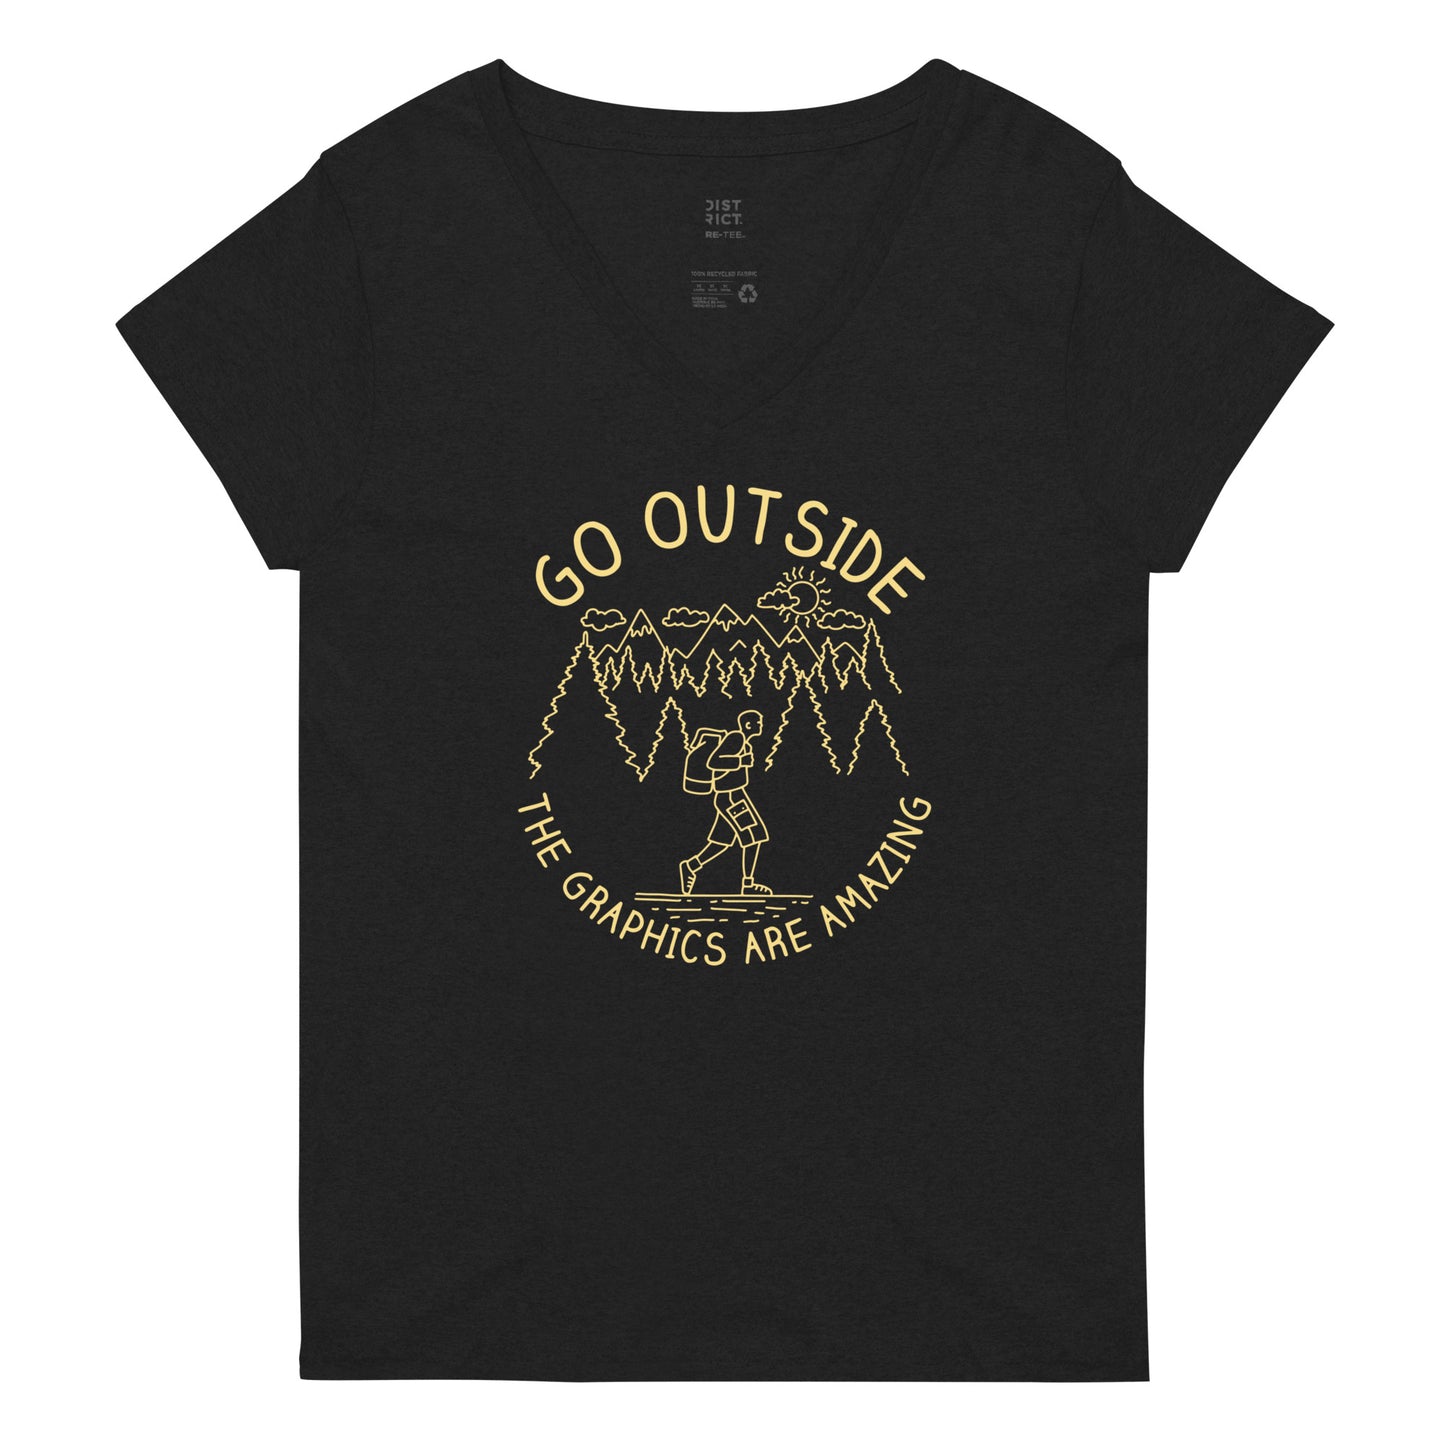 Go Outside The Graphics Are Amazing Women's V-Neck Tee